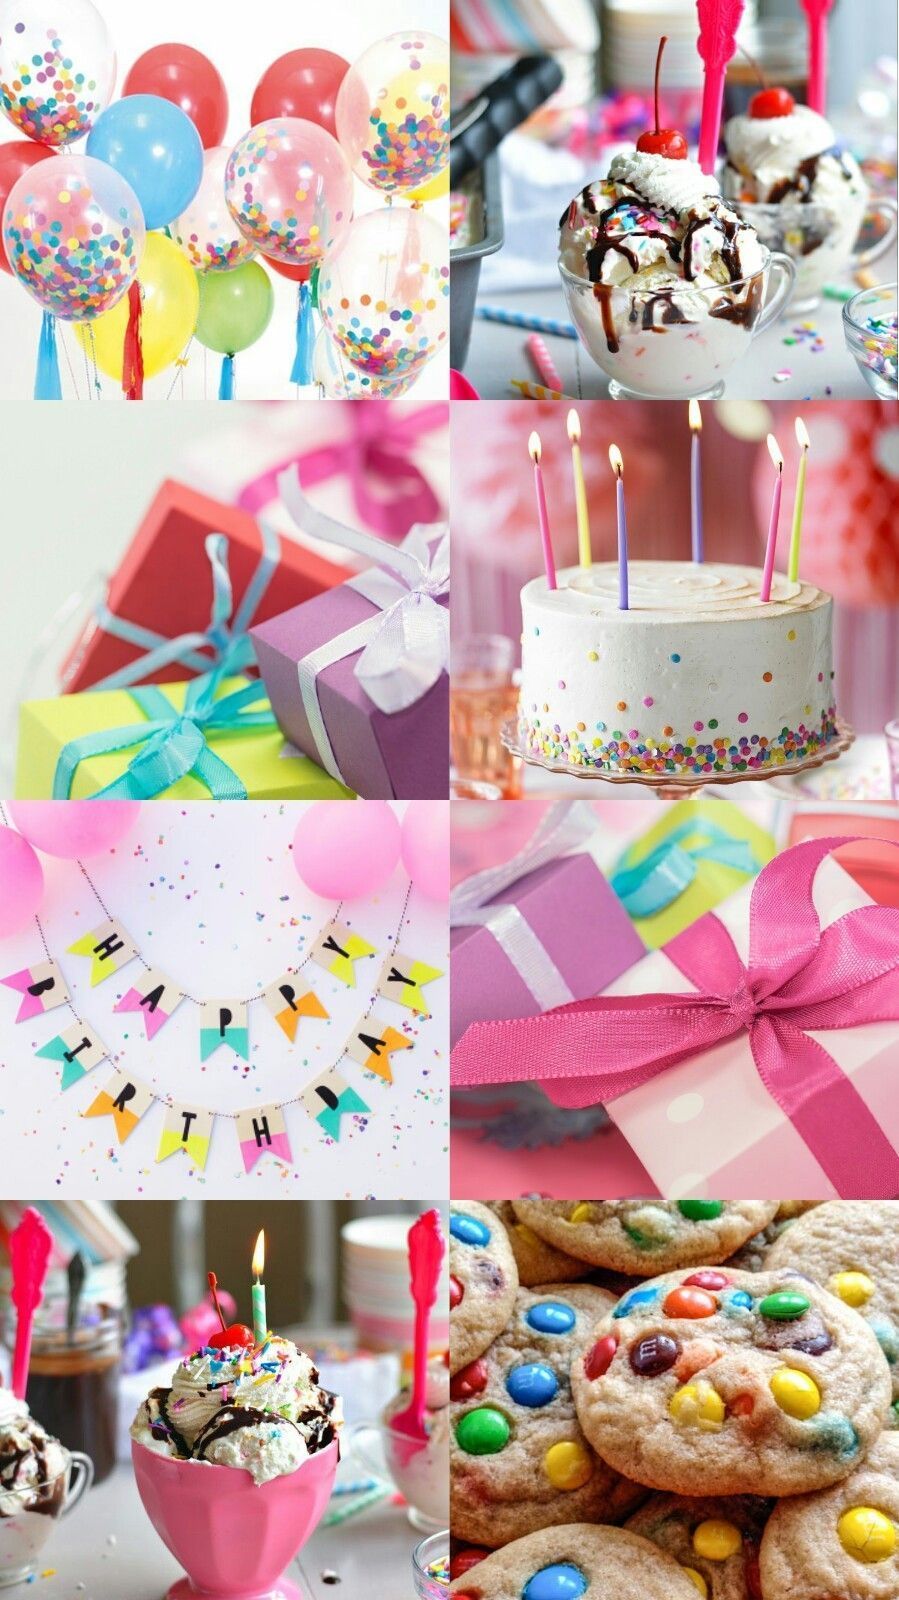 A collage of birthday party items including balloons, cake, presents, and cookies. - Birthday